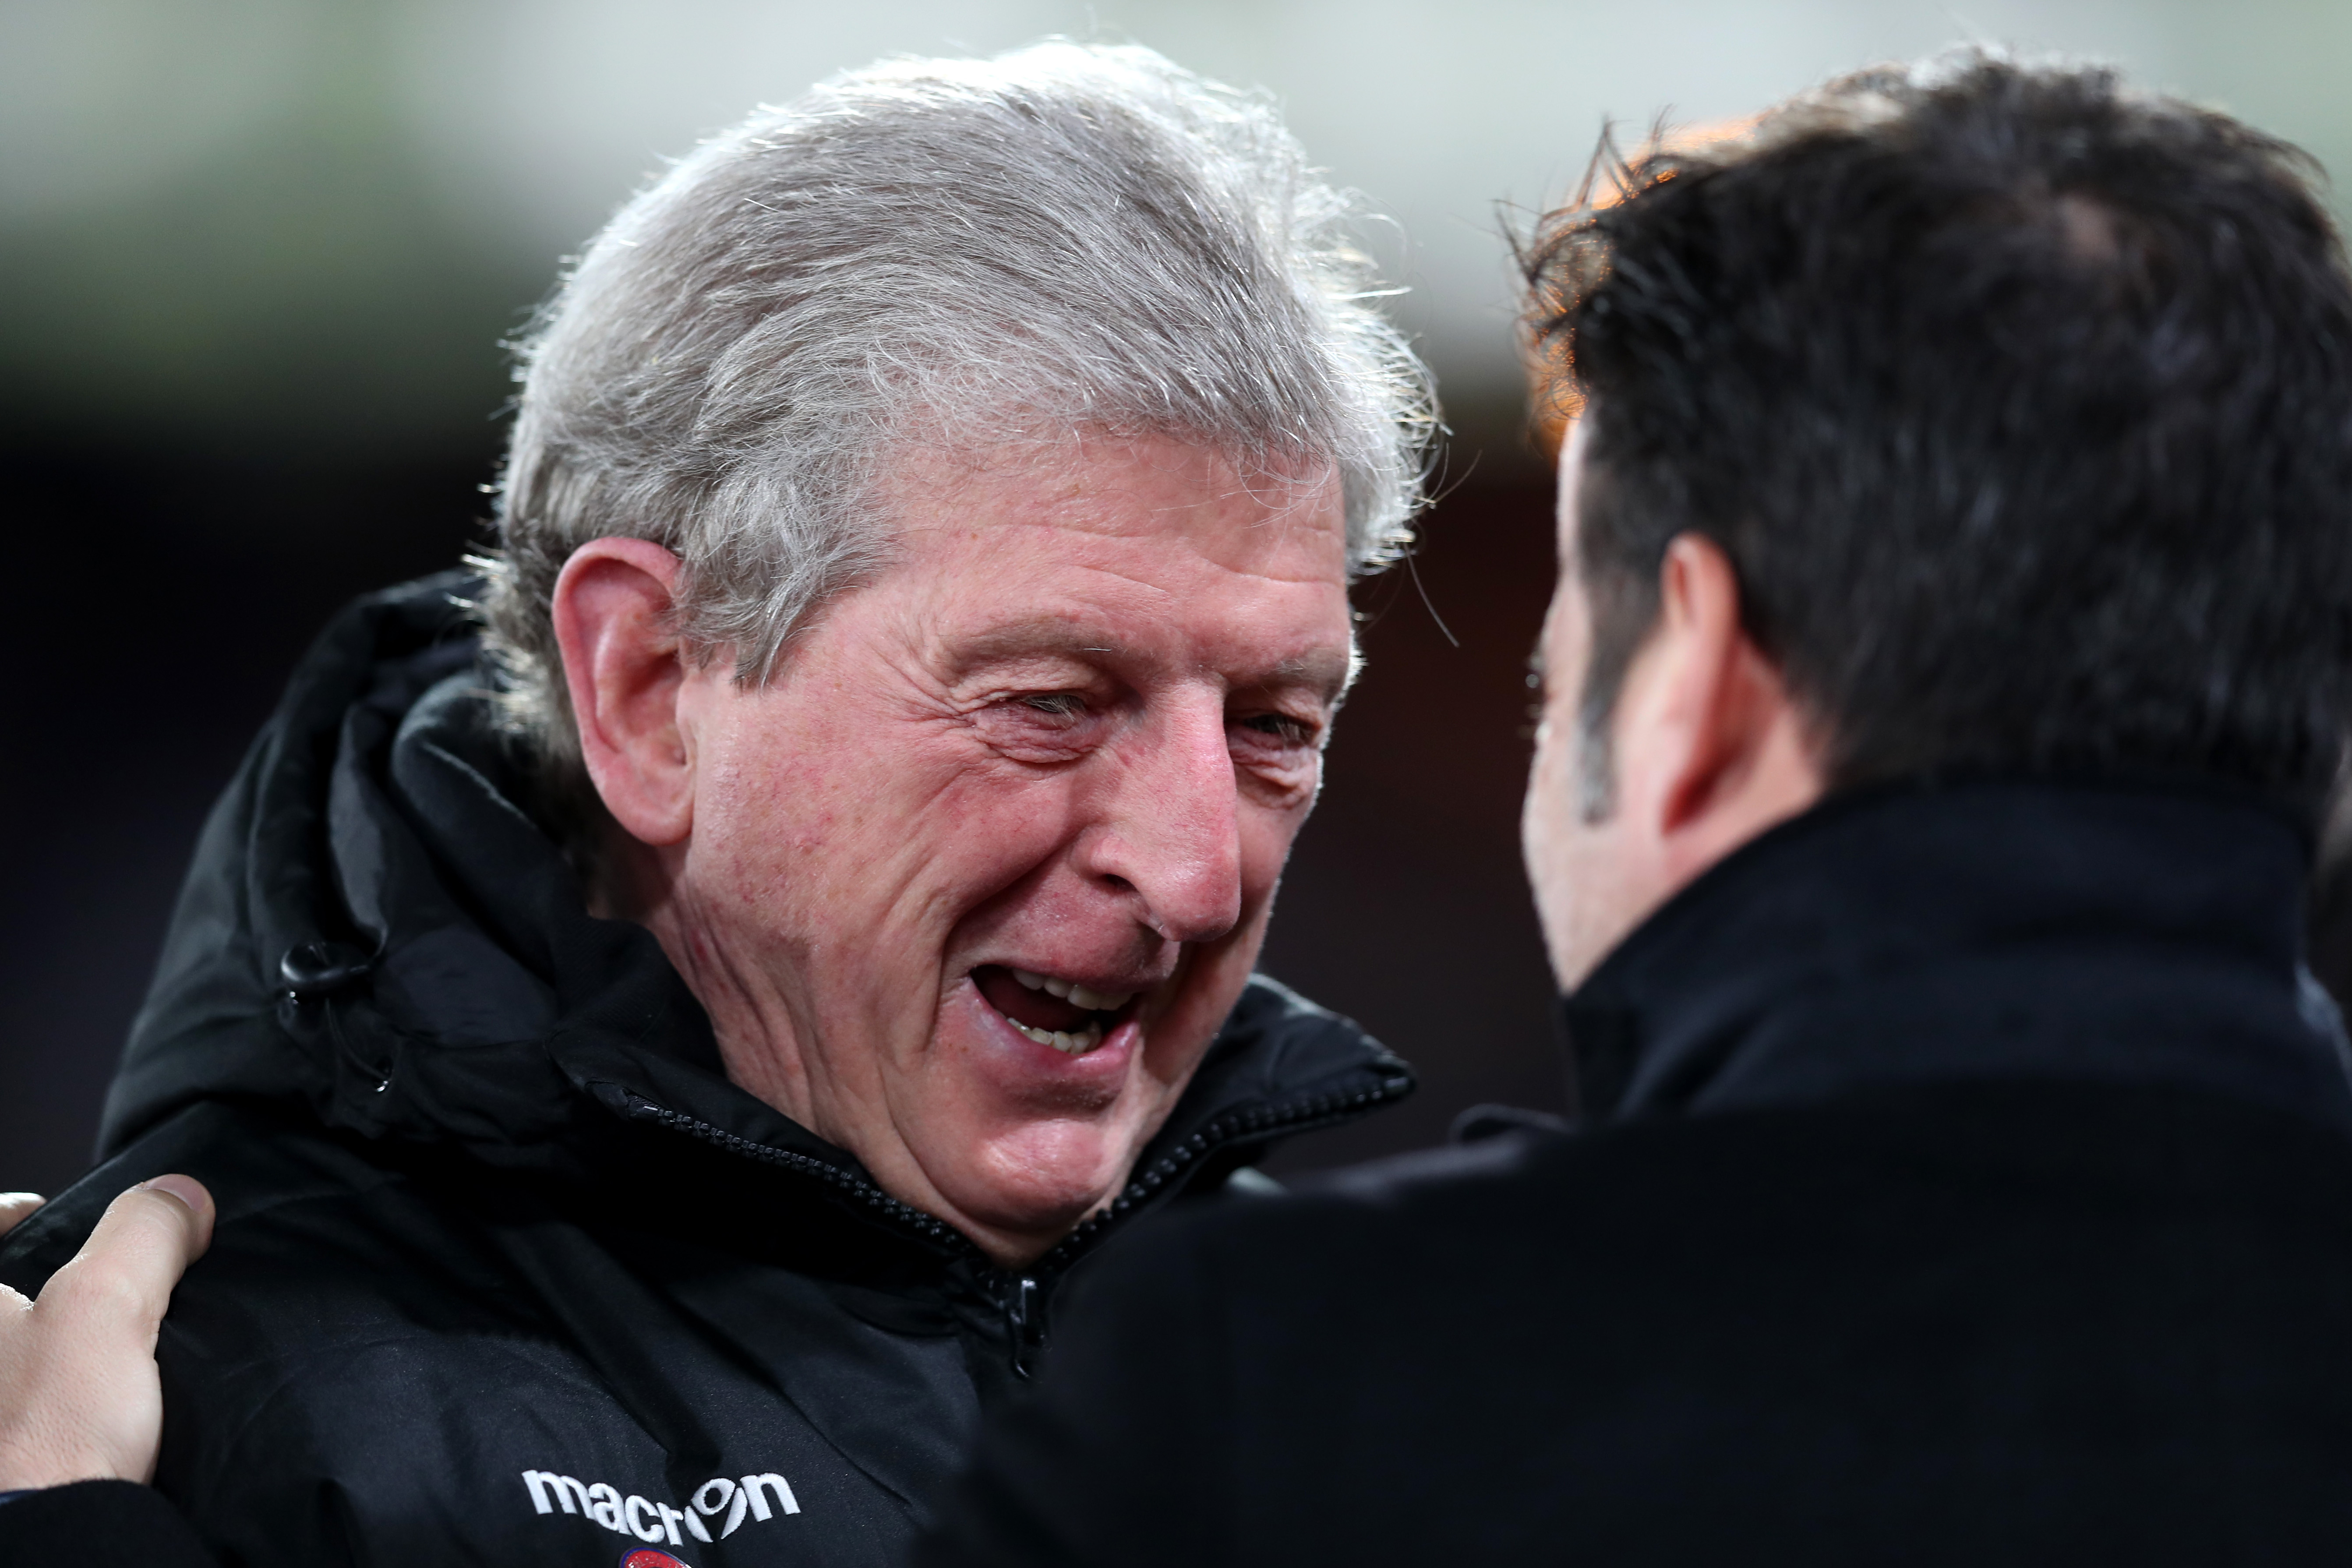 LONDON, ENGLAND - DECEMBER 12:  Roy Hodgson, Manager of Crystal Palace greets Marco Silva, Manager of Watford prior to the Premier League match between Crystal Palace and Watford at Selhurst Park on December 12, 2017 in London, England.  (Photo by Dan Istitene/Getty Images)